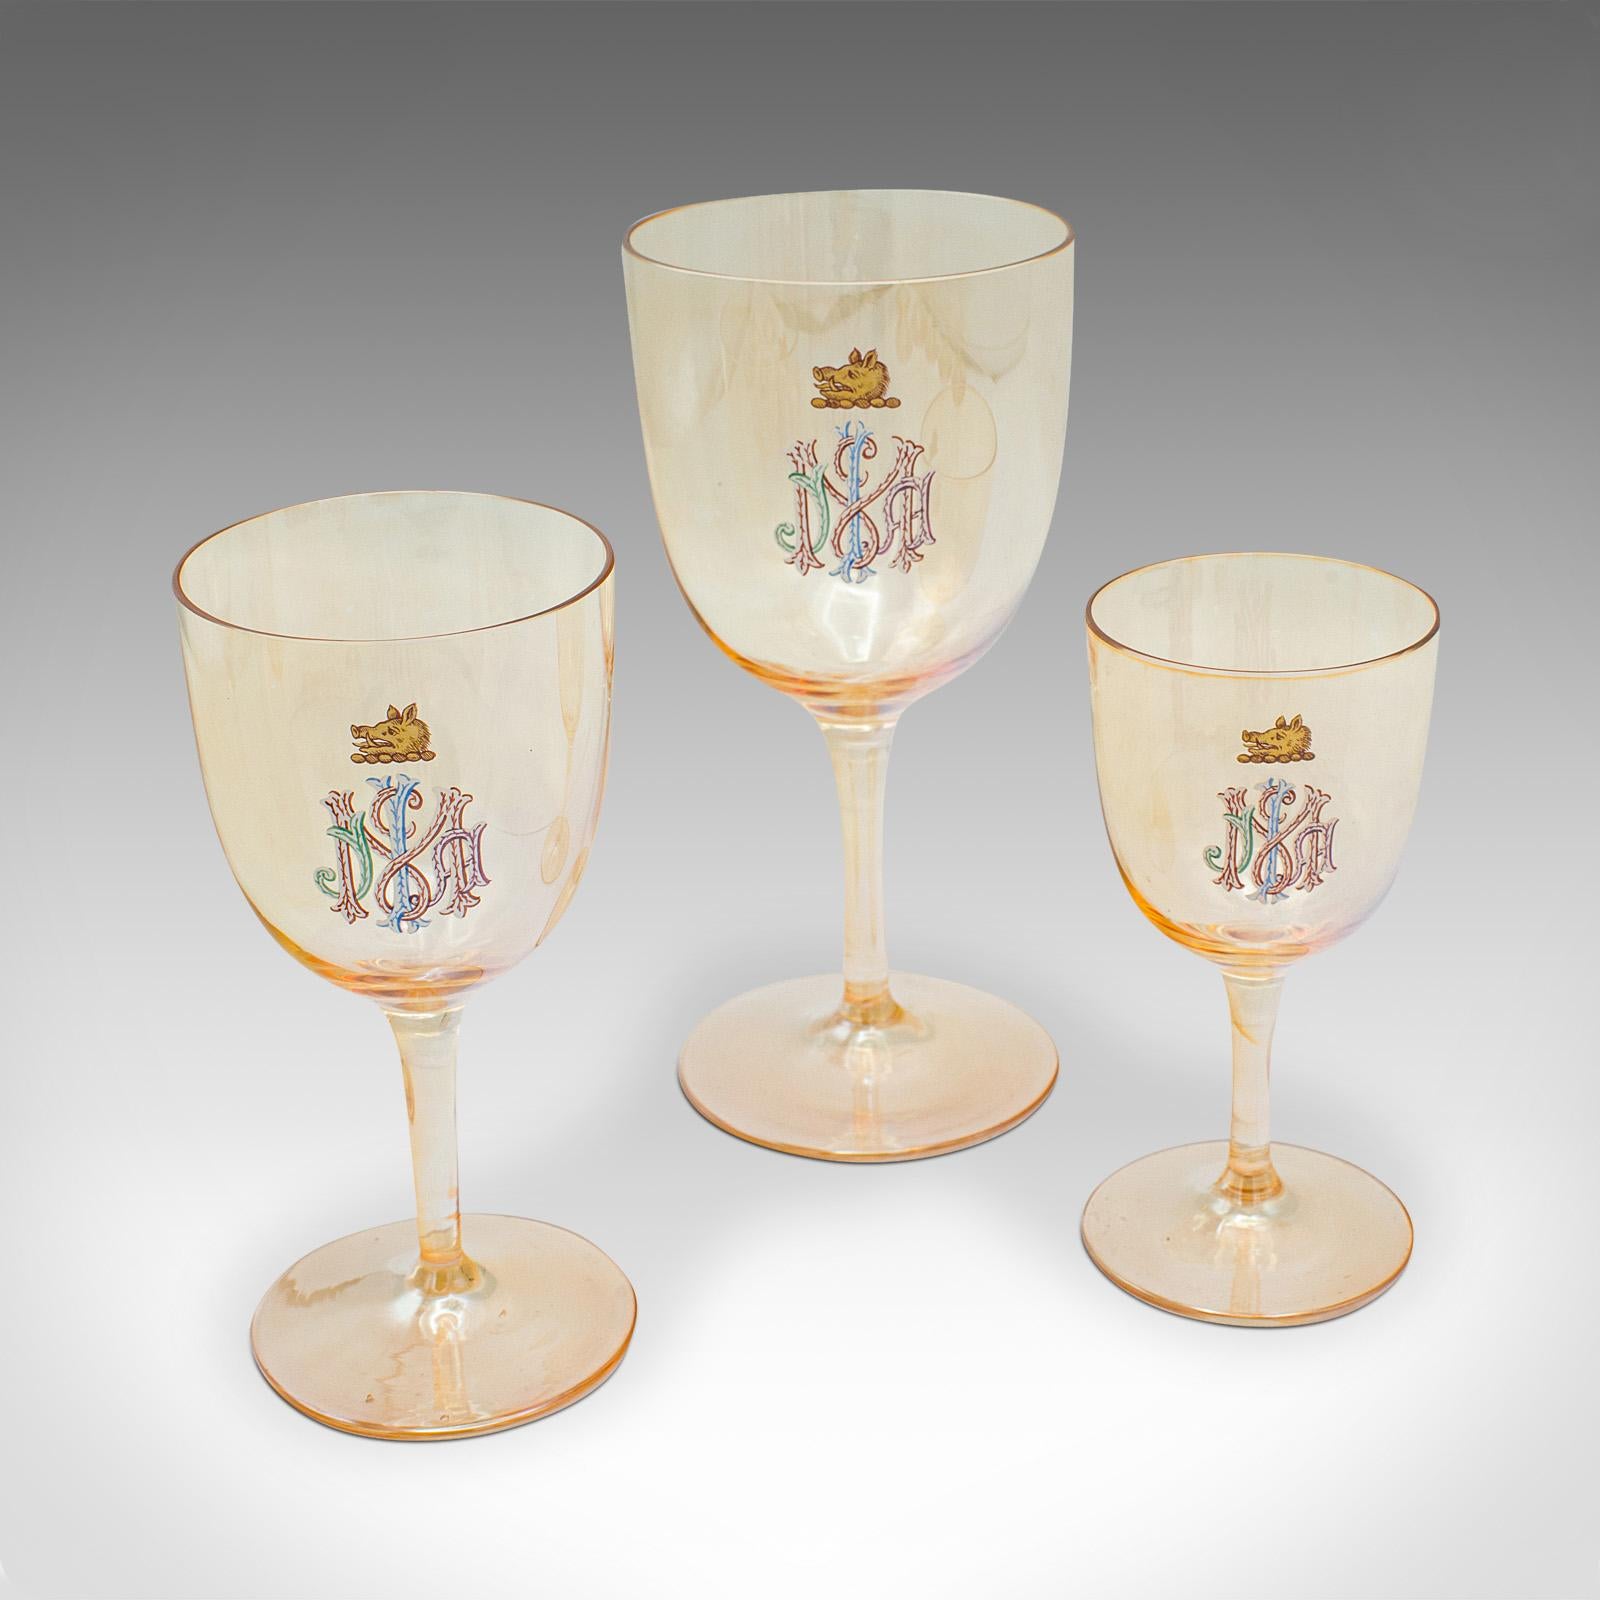 
This is an antique cocktail glass service. An Austrian, 12 piece wine, dessert and aperitif glass set, dating to the late Victorian period, circa 1900.

Appealing Marigold lustre set, ideal for a cocktail party
Displaying a desirable aged patina